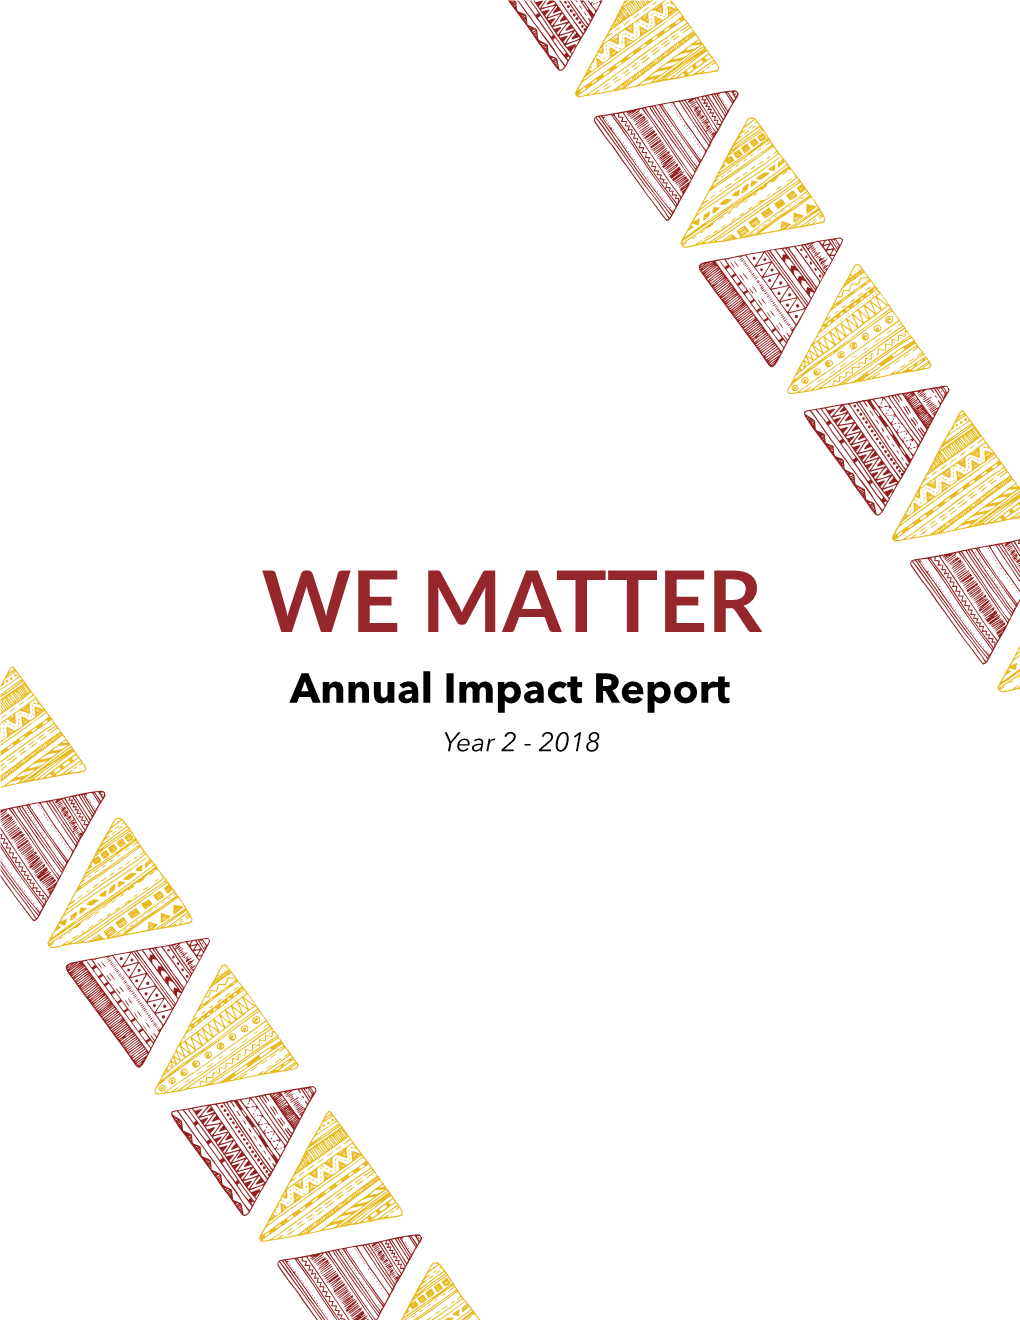 Annual Impact Report Year 2 - 2018 CONTENT